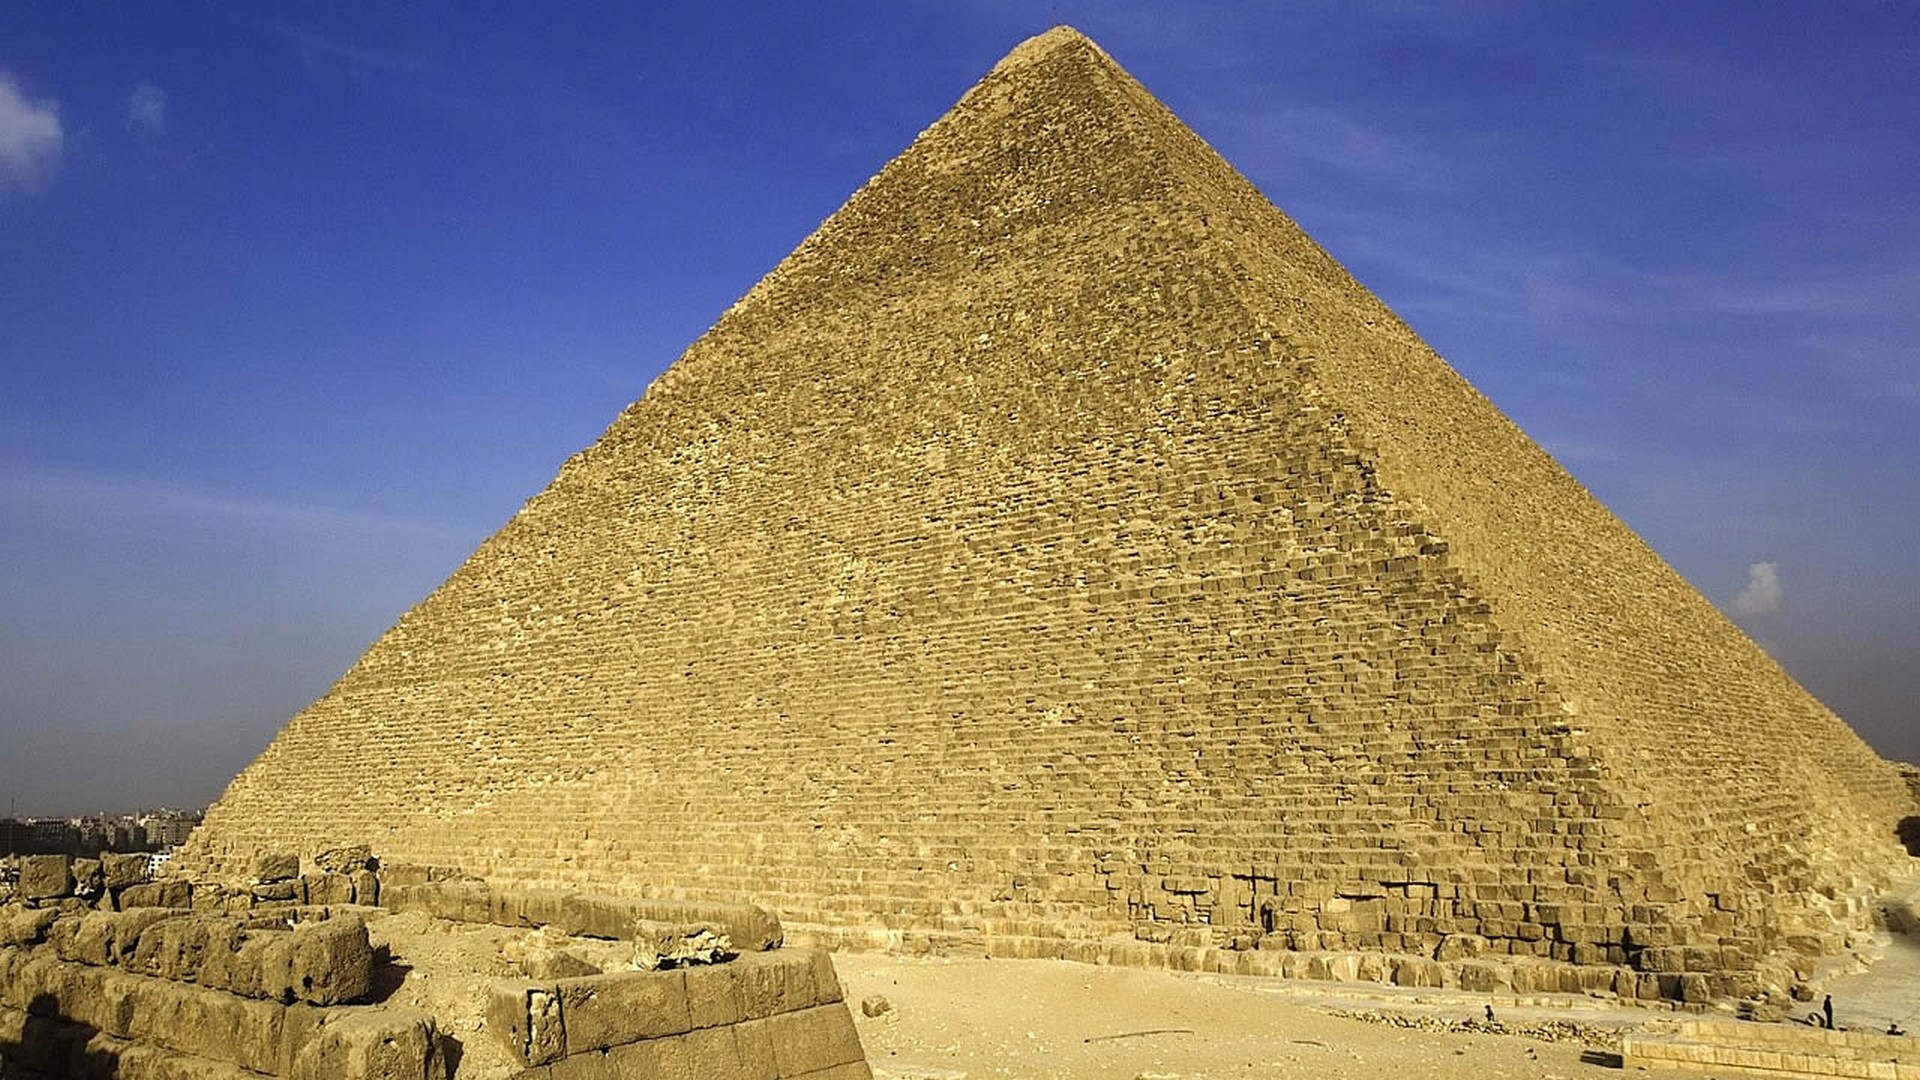 1920x1080 Pyramid Wallpapers, Pictures, Images